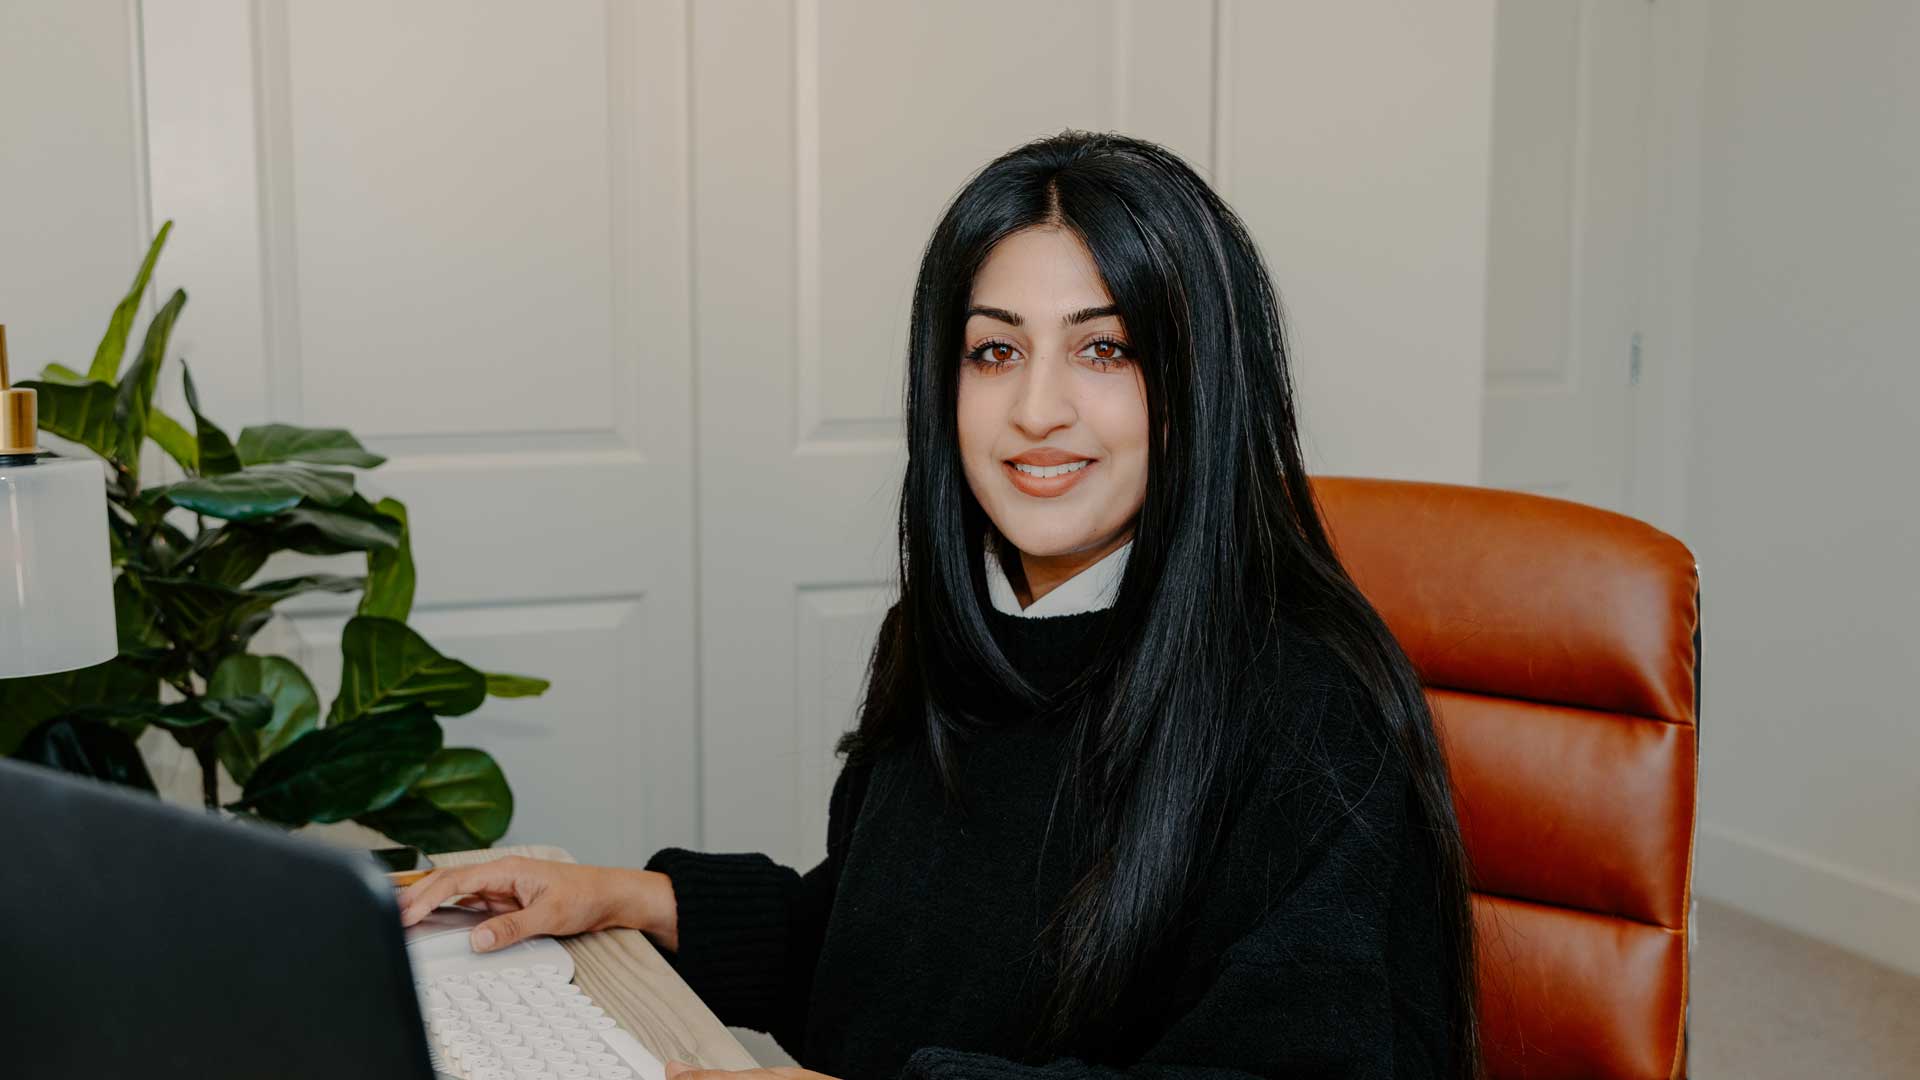 Rana sits at the desk in her home office